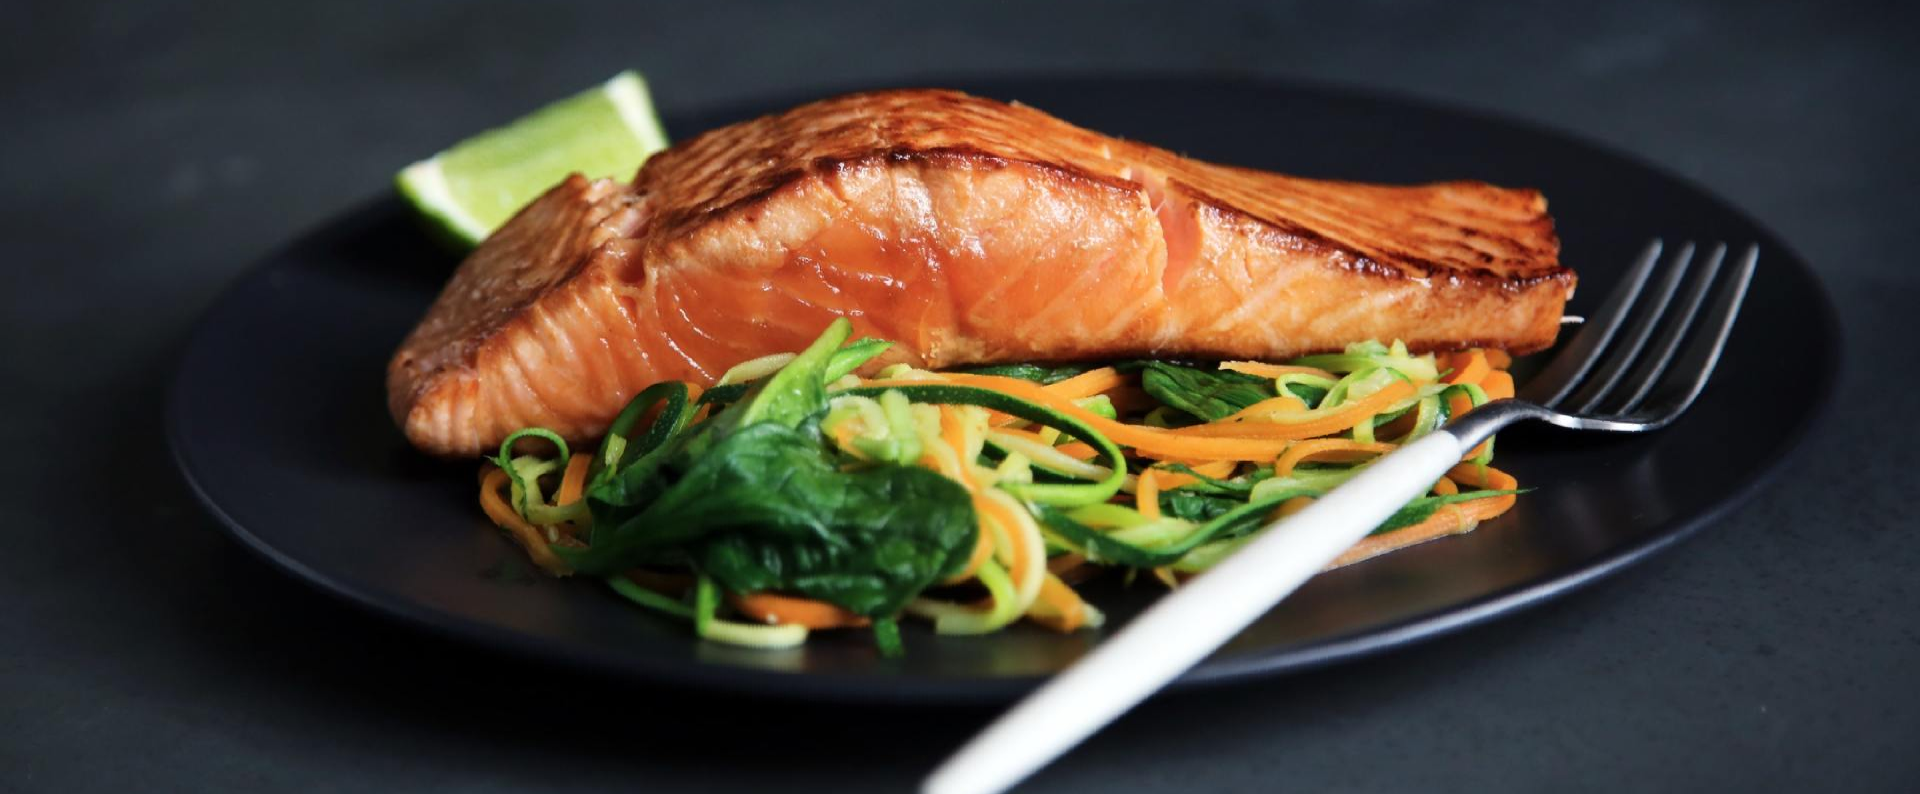 Healthy salmon meal